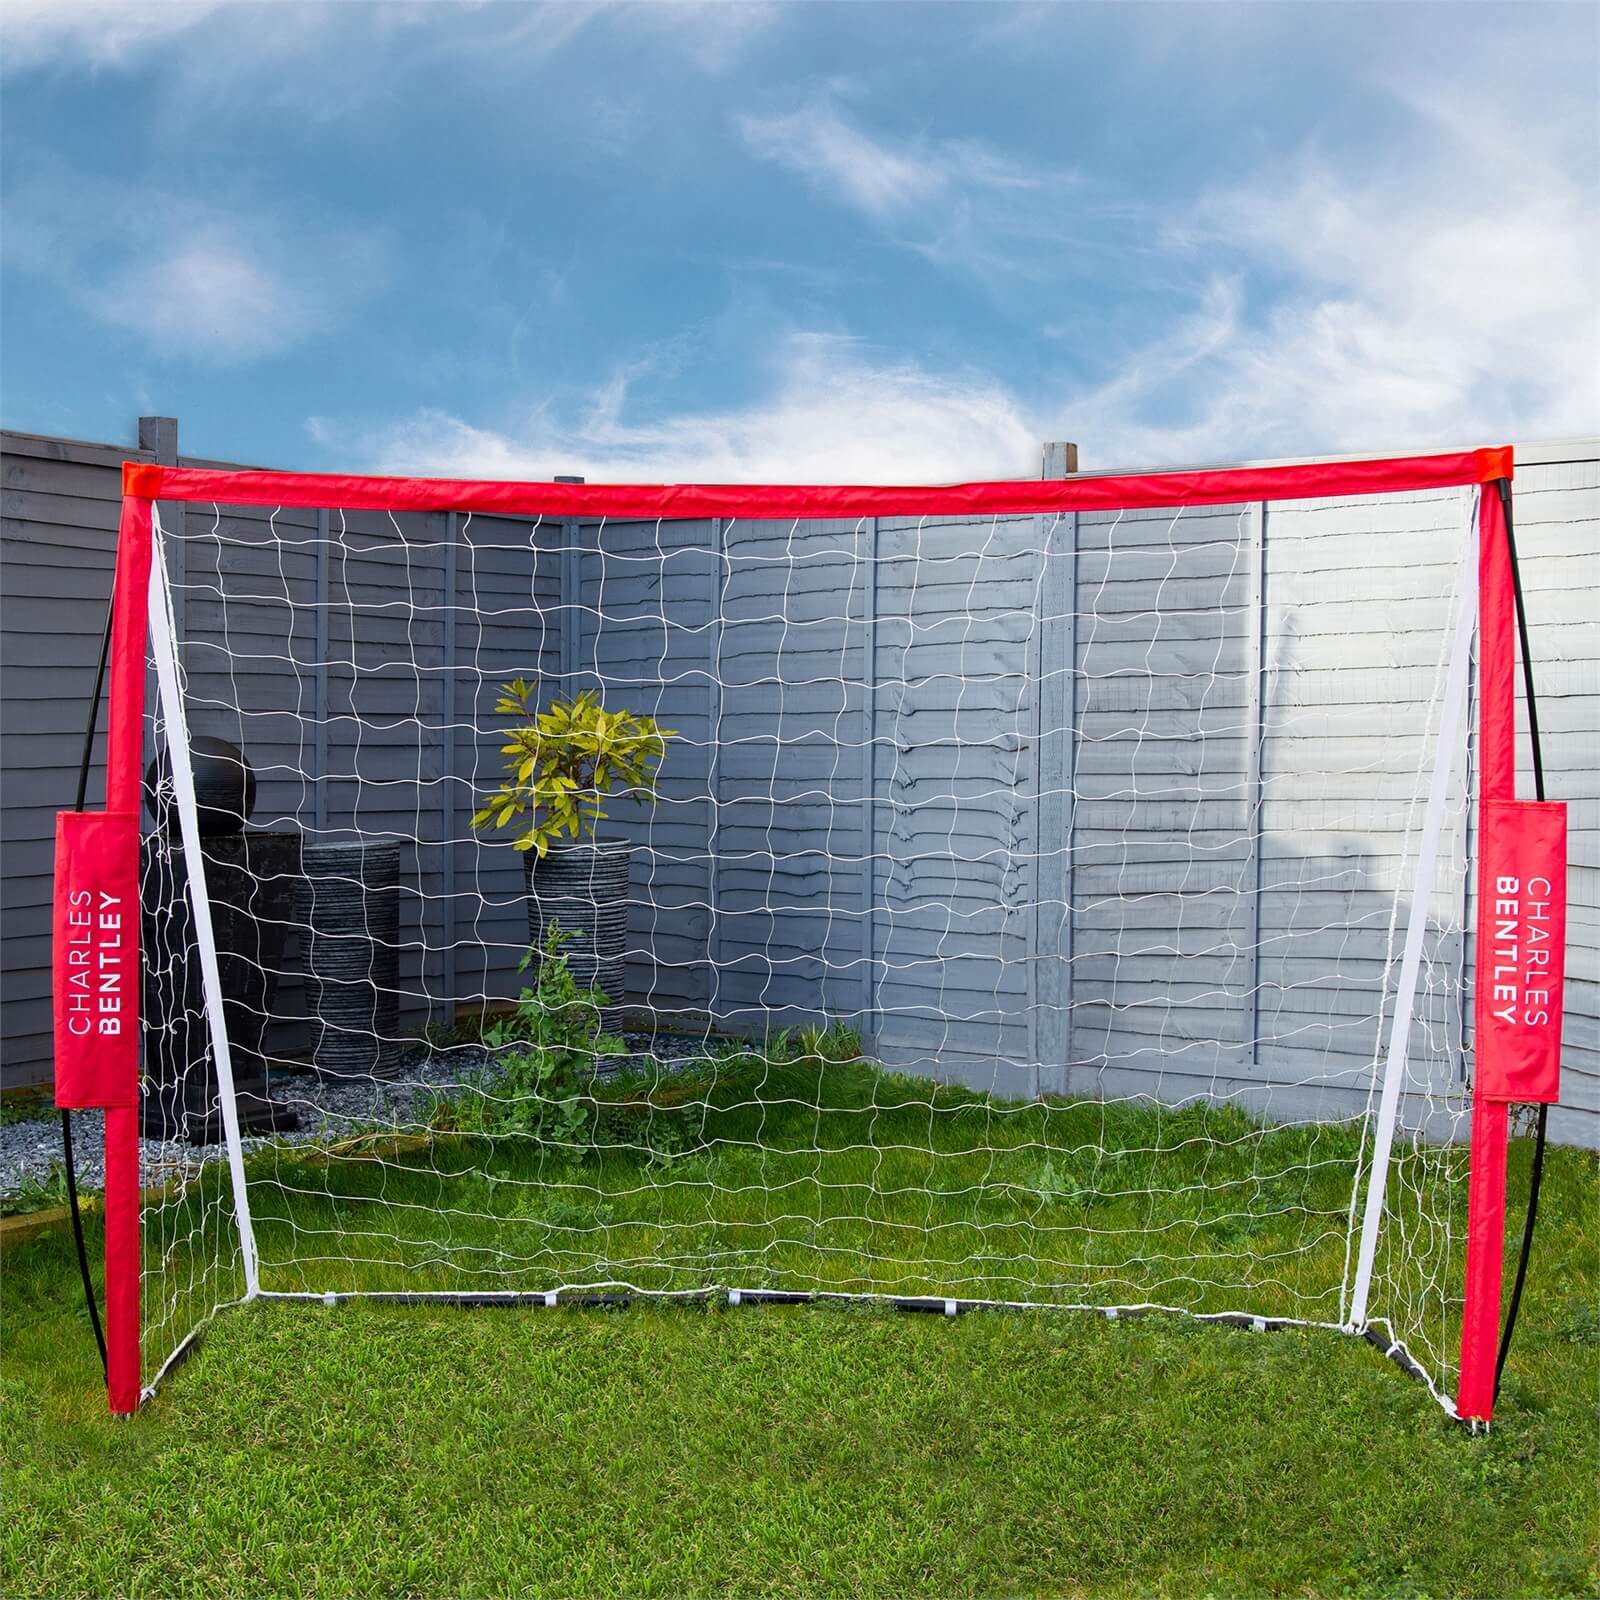 Charles Bentley 7x5ft PortableTraining Goal with Cary Bag